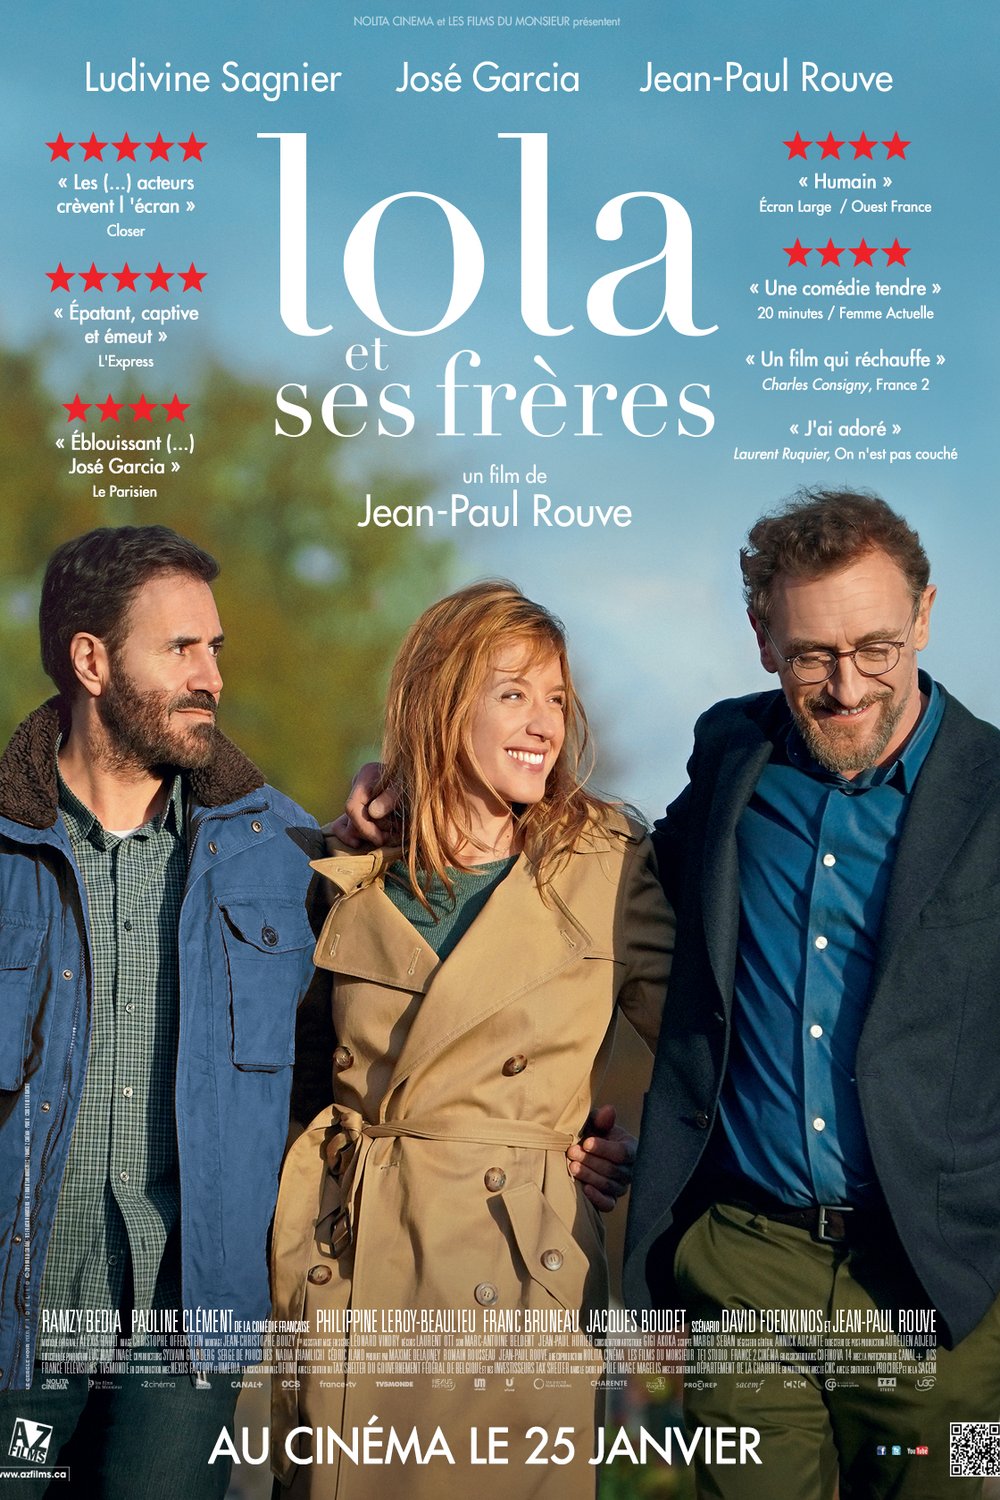 Poster of the movie Lola et ses frères